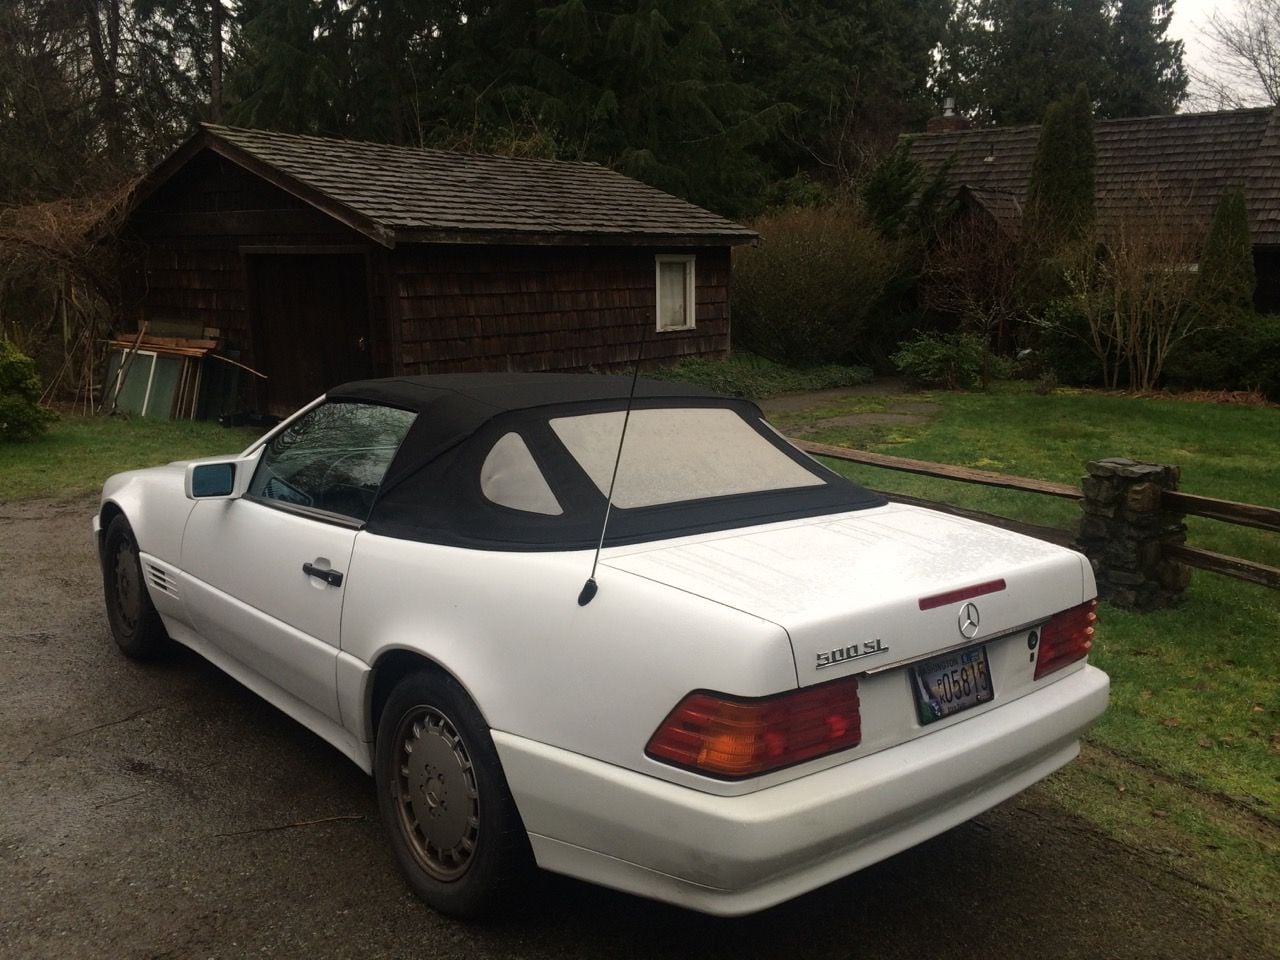 1992 Mercedes-Benz 500SL - Rare - German Built - 1992 Classic Mercedes 500 SL Roadster Convertible - Used - VIN WDBFA66E5NF039778 - 2WD - Automatic - Convertible - White - Langley, WA 98260, United States